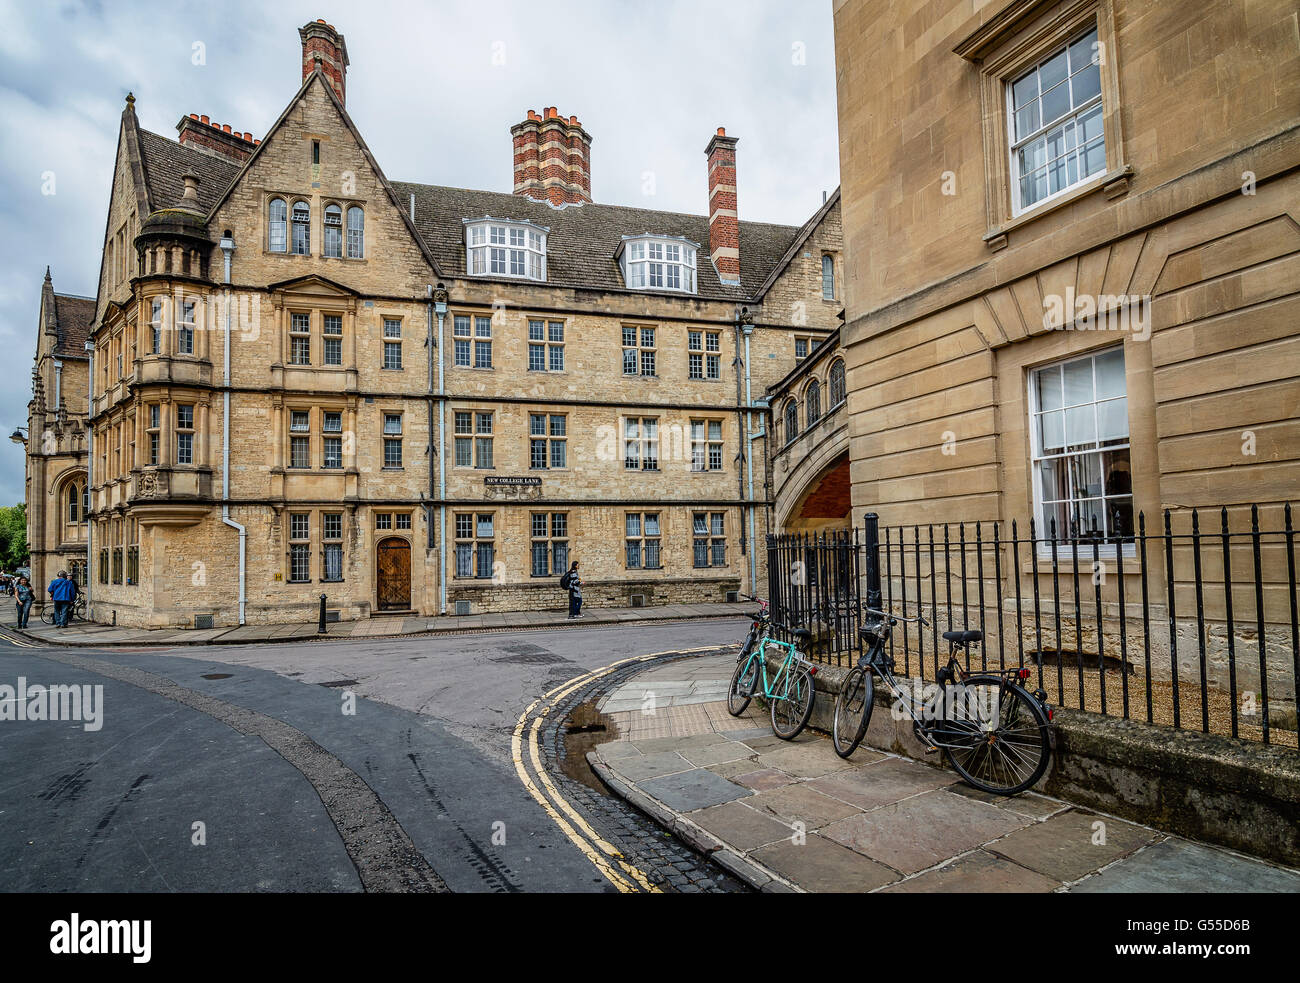 Oxford, UK - August 14, 2015: New College Lane and Bridge of Sighs in Oxford with bicycles parked in the fence iron. The city is Stock Photo